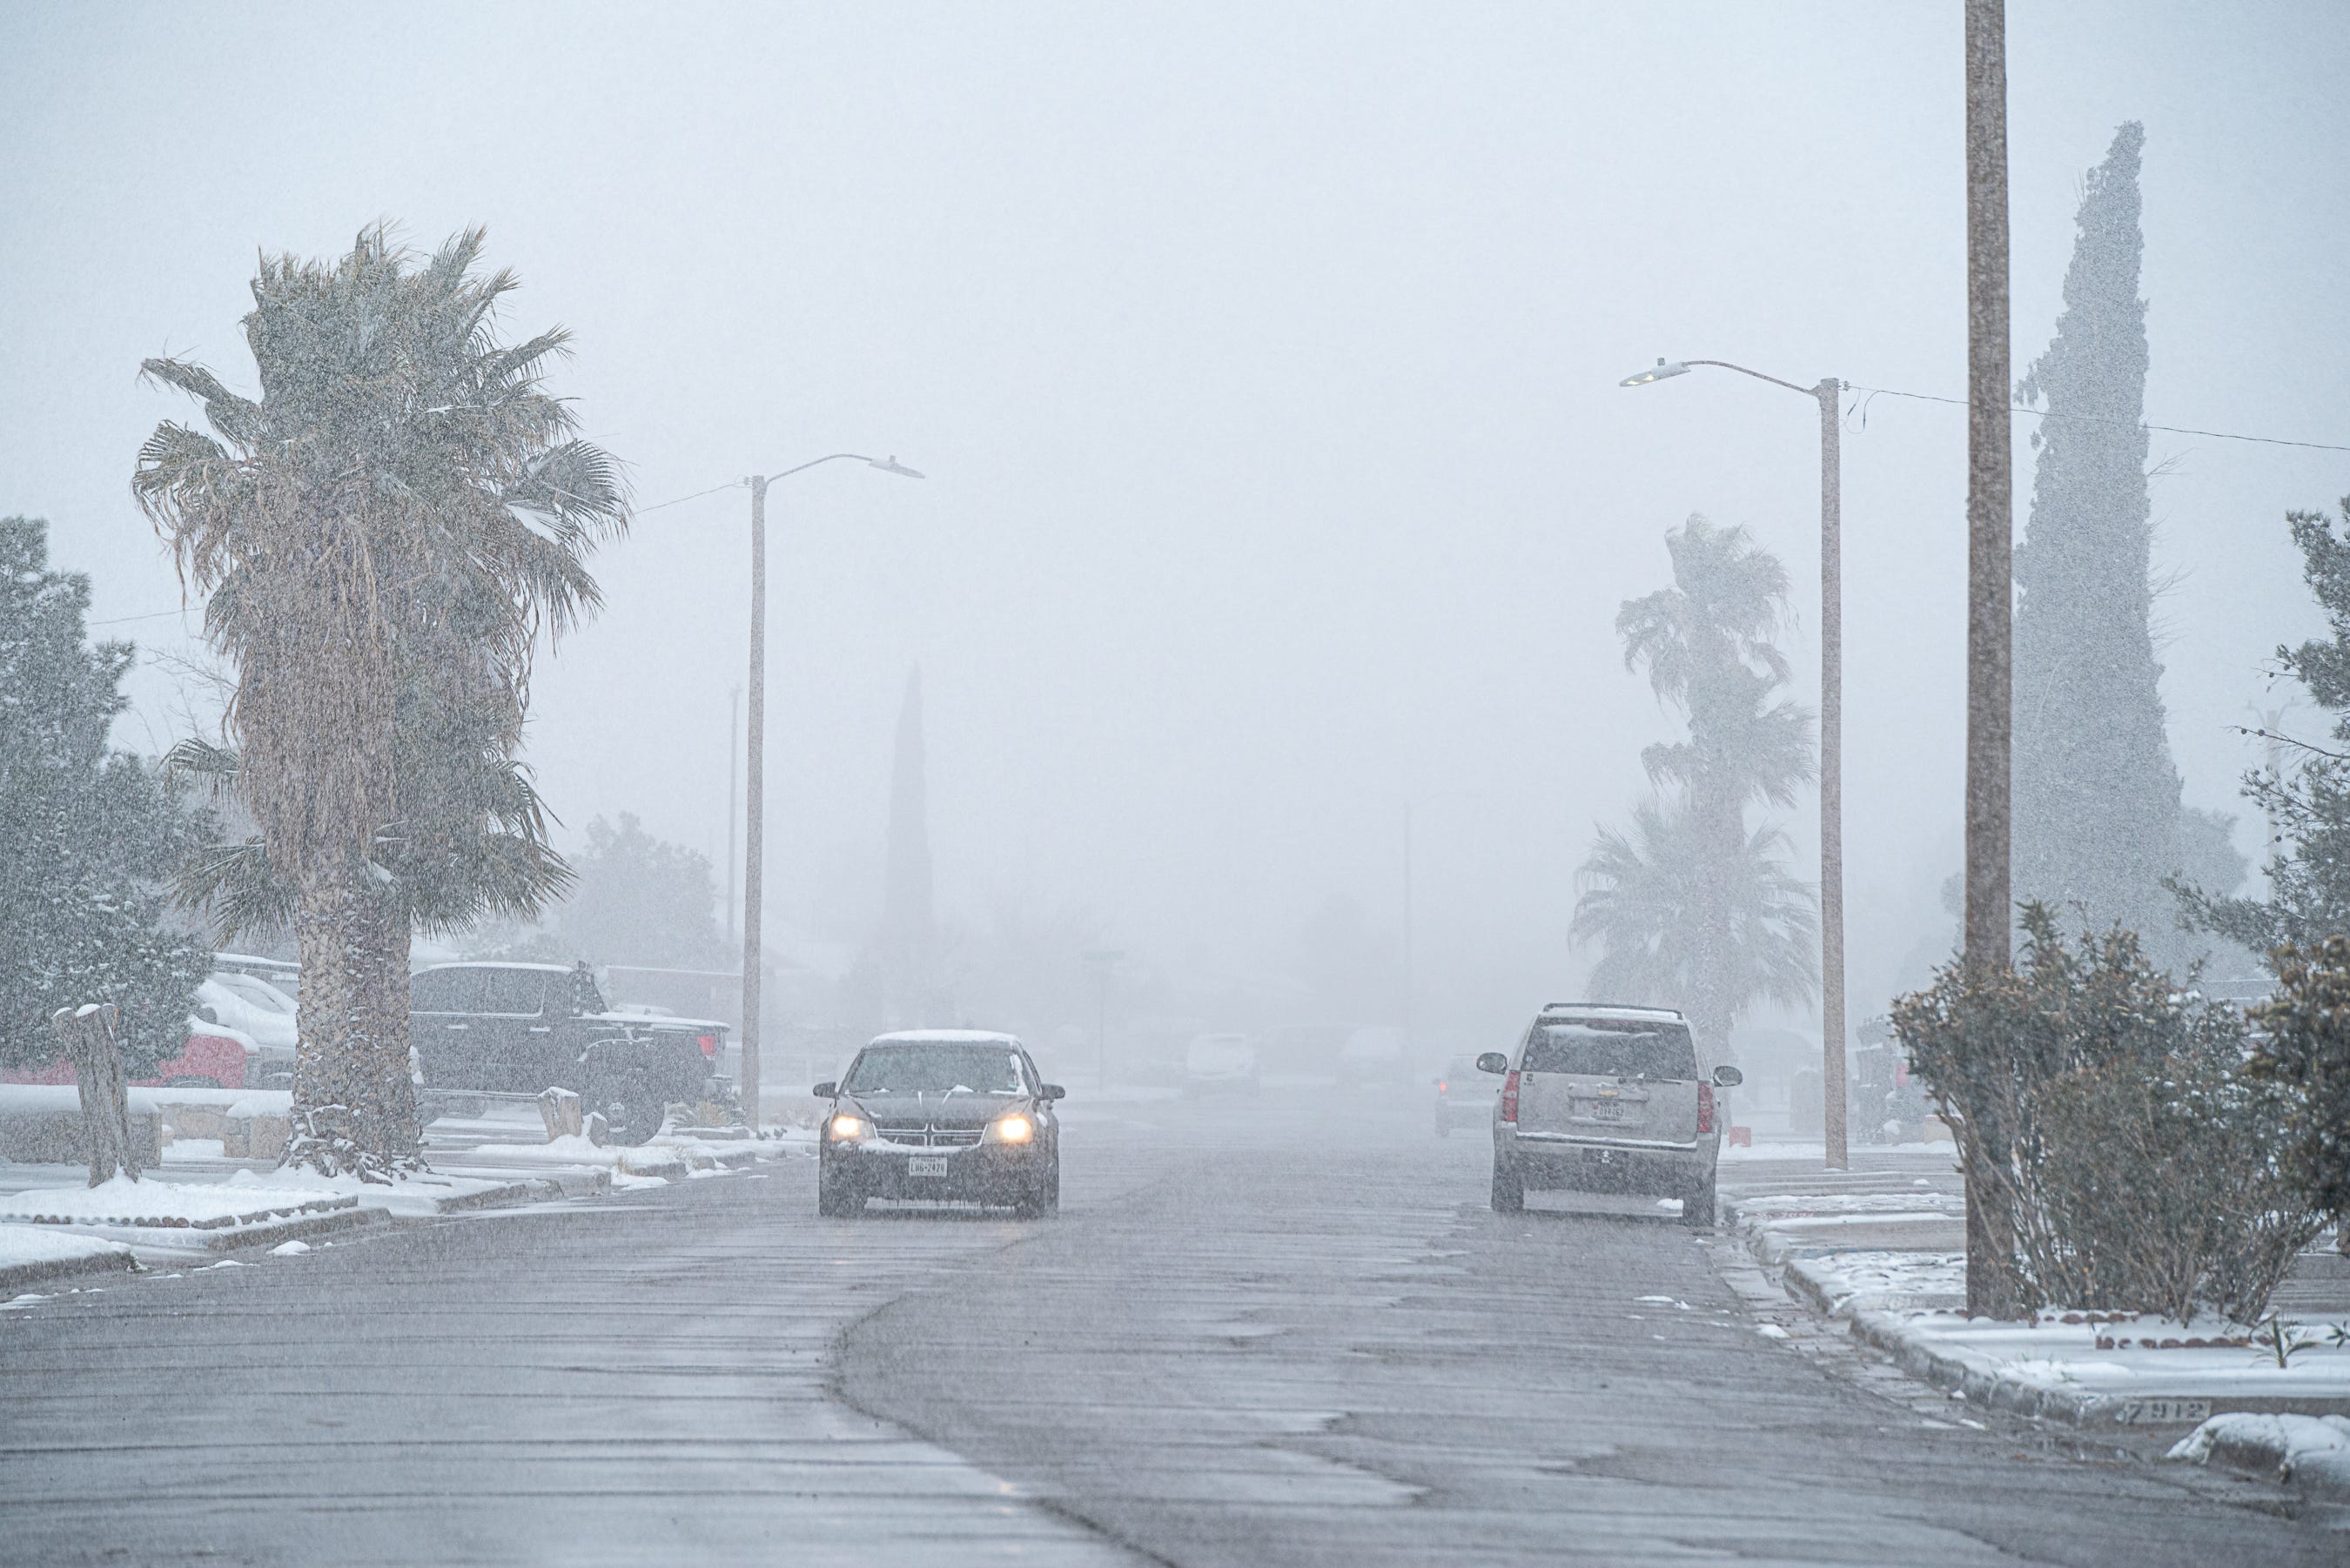 Visibility was low in El Paso's lower valley. Snow fell most of the day in El Paso on Valentine's Day. Feb. 14, 2021.